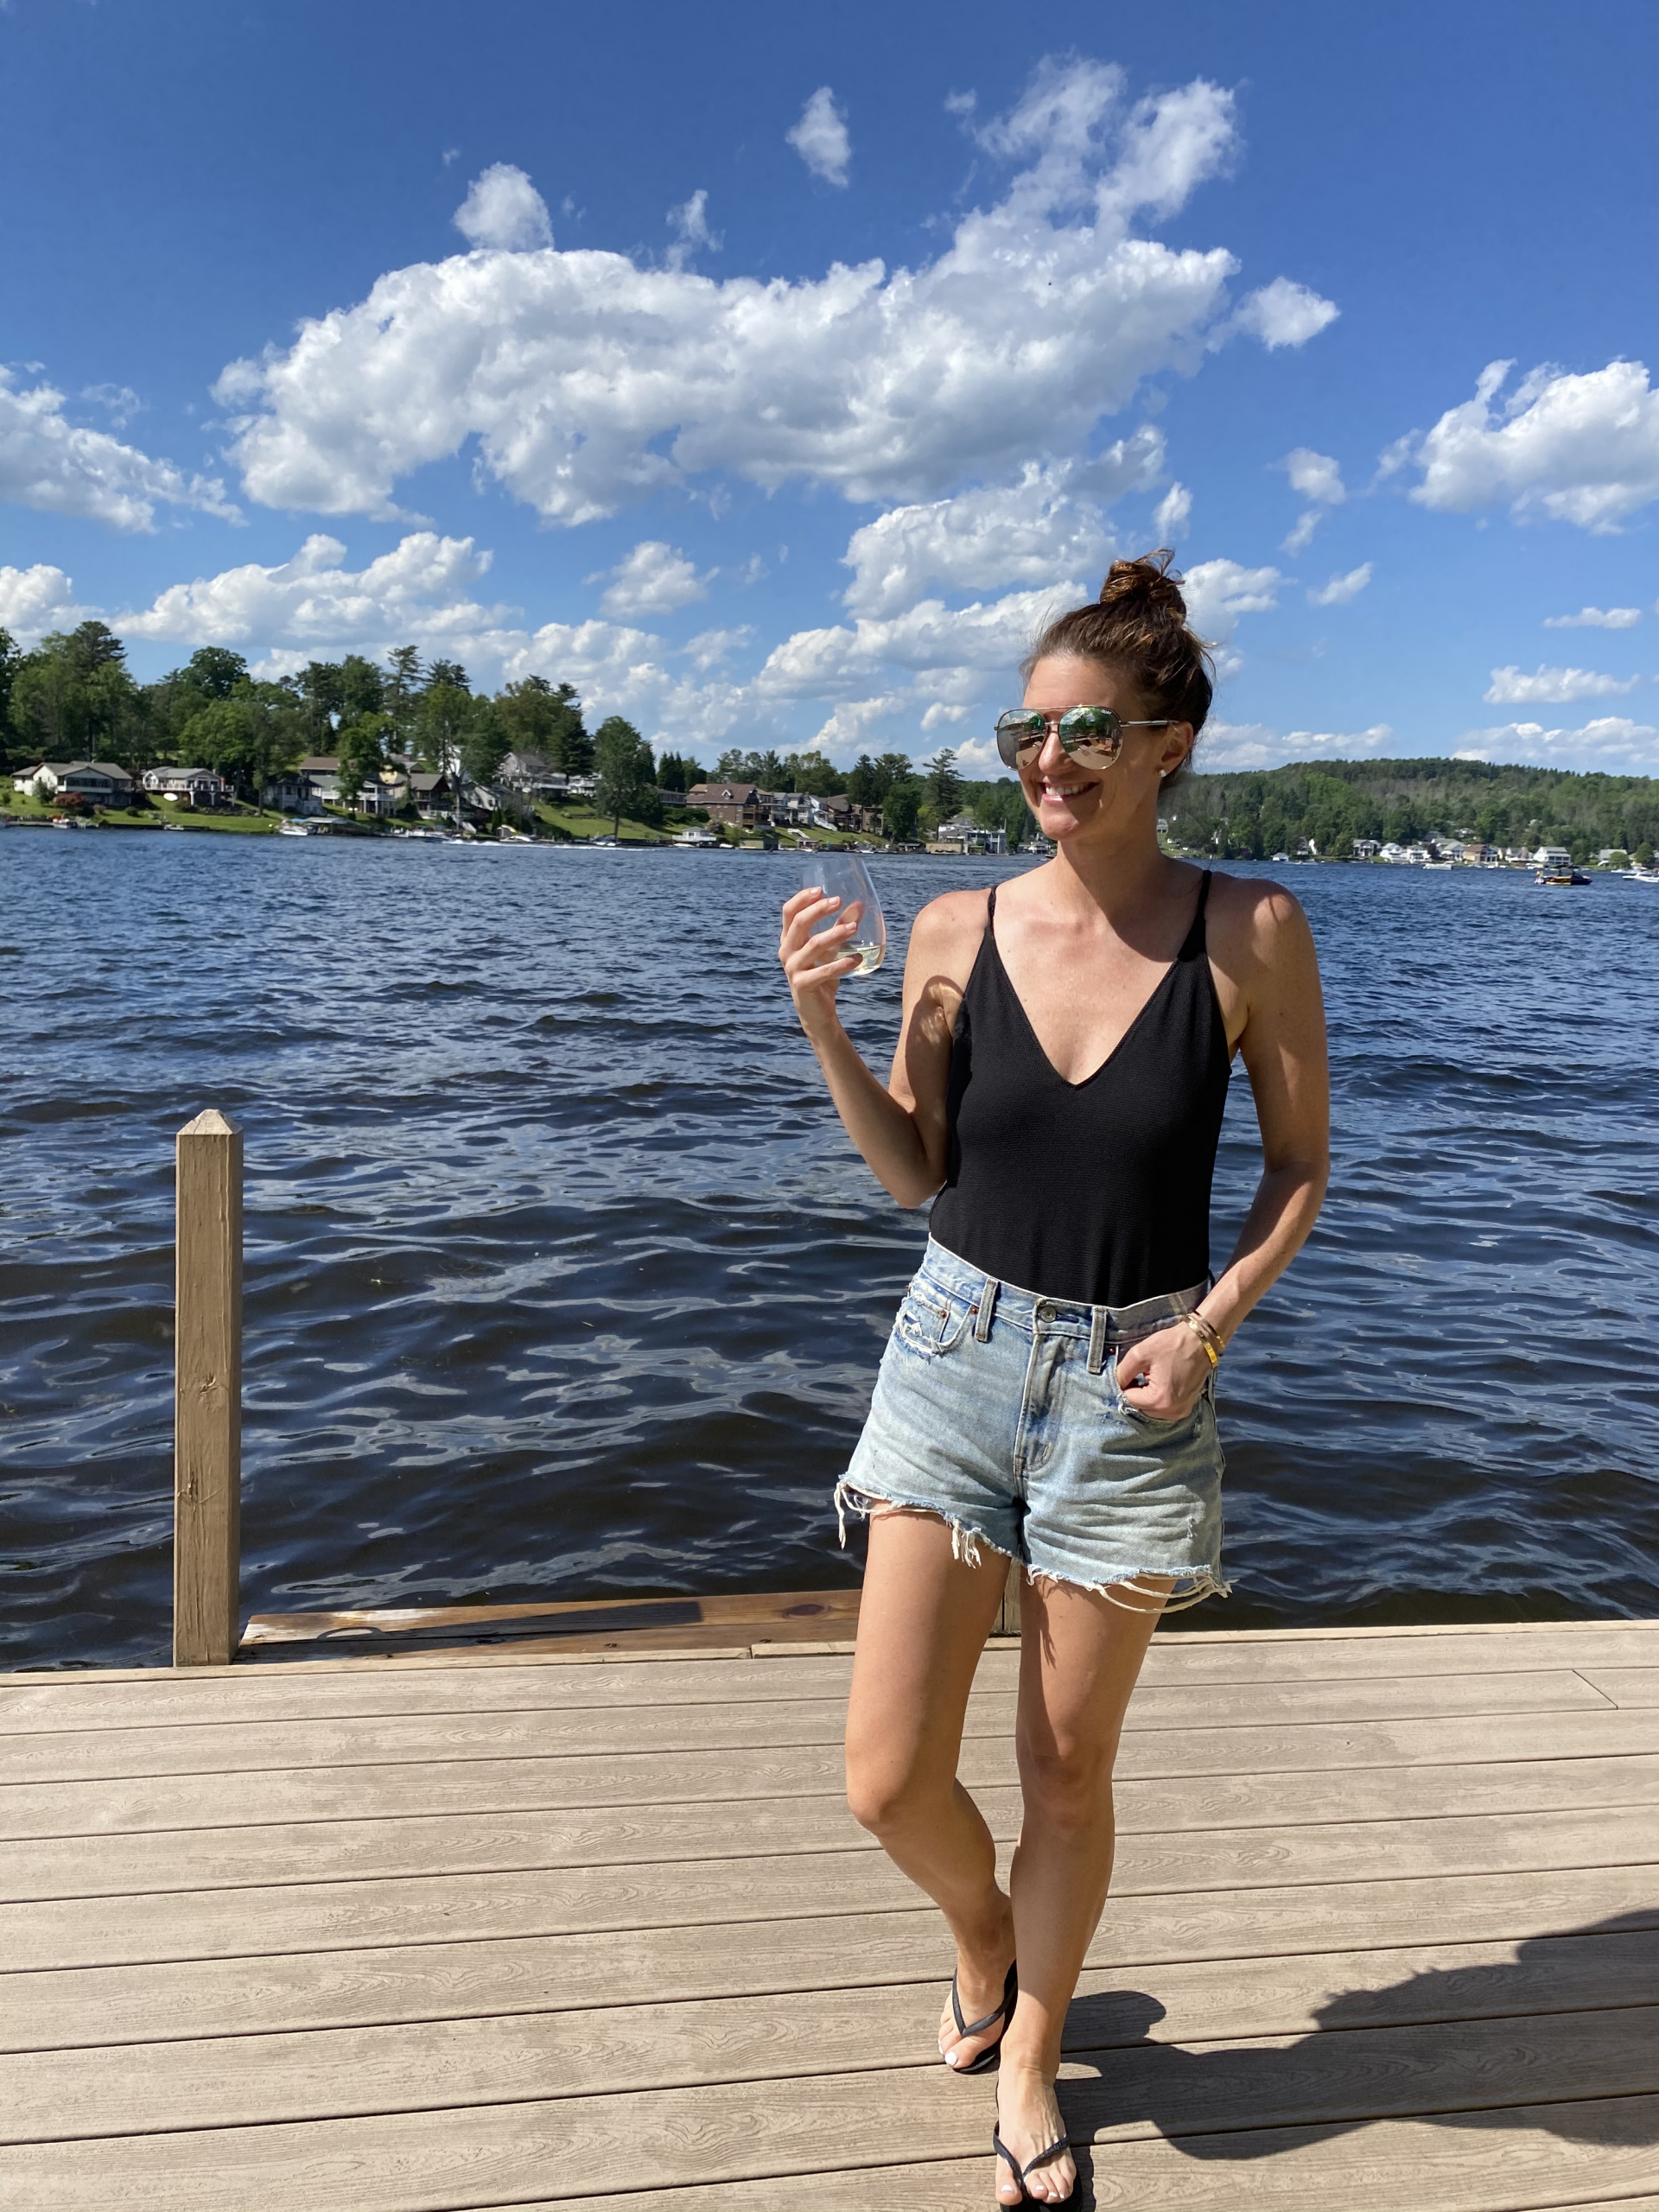 Lake vacation, lake winola pa, where to summer in the northeast